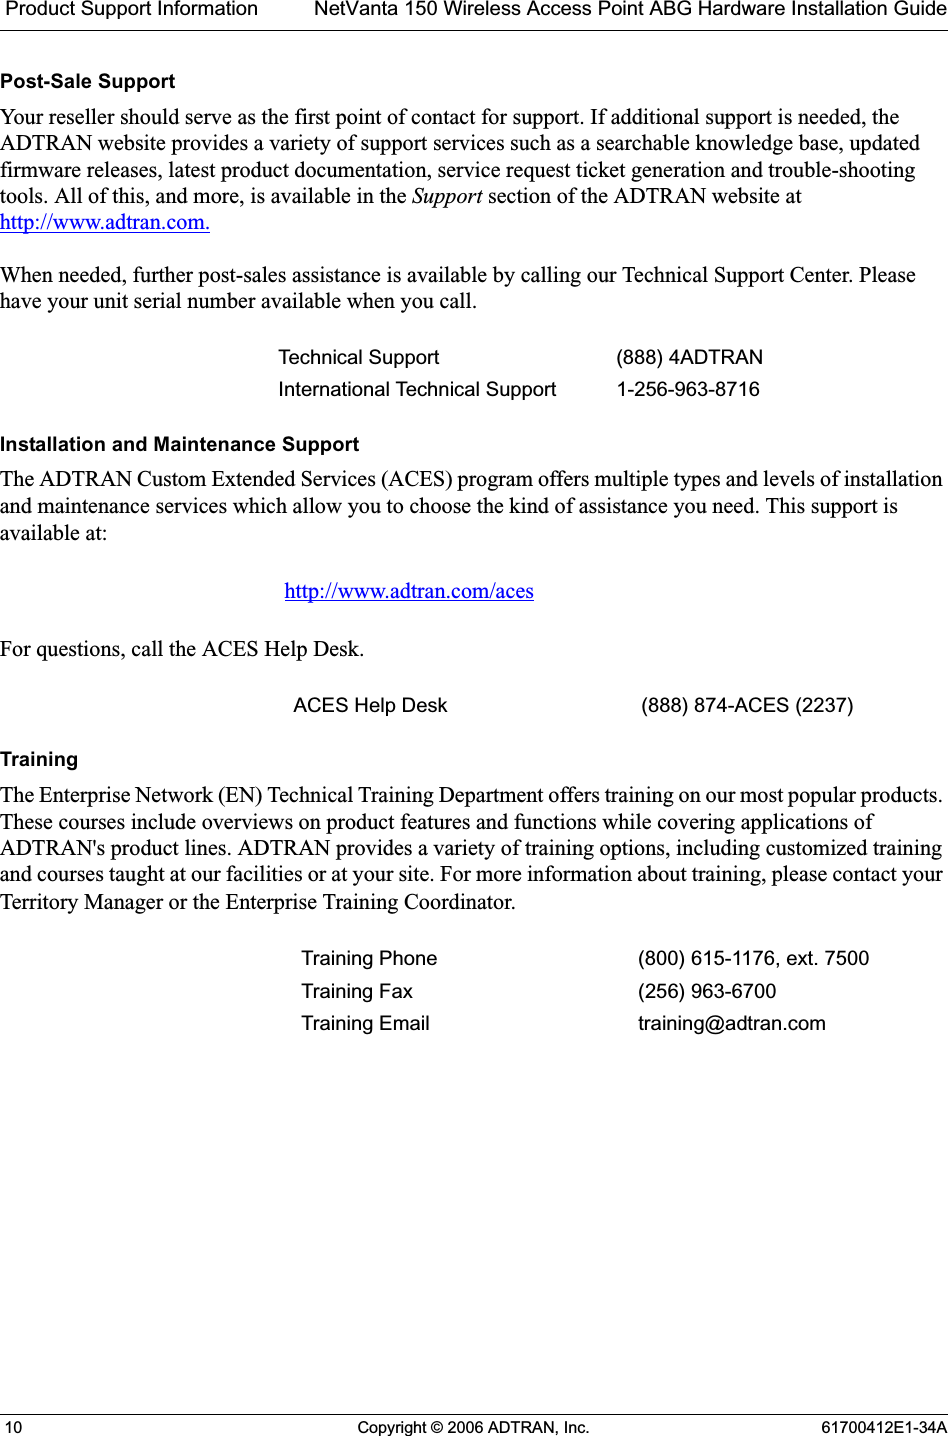  Product Support Information NetVanta 150 Wireless Access Point ABG Hardware Installation Guide 10 Copyright © 2006 ADTRAN, Inc. 61700412E1-34APost-Sale SupportYour reseller should serve as the first point of contact for support. If additional support is needed, the ADTRAN website provides a variety of support services such as a searchable knowledge base, updated firmware releases, latest product documentation, service request ticket generation and trouble-shooting tools. All of this, and more, is available in the Support section of the ADTRAN website at  http://www.adtran.com.When needed, further post-sales assistance is available by calling our Technical Support Center. Please have your unit serial number available when you call.Installation and Maintenance SupportThe ADTRAN Custom Extended Services (ACES) program offers multiple types and levels of installation and maintenance services which allow you to choose the kind of assistance you need. This support is available at:For questions, call the ACES Help Desk. TrainingThe Enterprise Network (EN) Technical Training Department offers training on our most popular products. These courses include overviews on product features and functions while covering applications of ADTRAN&apos;s product lines. ADTRAN provides a variety of training options, including customized training and courses taught at our facilities or at your site. For more information about training, please contact your Territory Manager or the Enterprise Training Coordinator.Technical Support (888) 4ADTRANInternational Technical Support 1-256-963-8716http://www.adtran.com/acesACES Help Desk (888) 874-ACES (2237) Training Phone (800) 615-1176, ext. 7500 Training Fax (256) 963-6700Training Email training@adtran.com